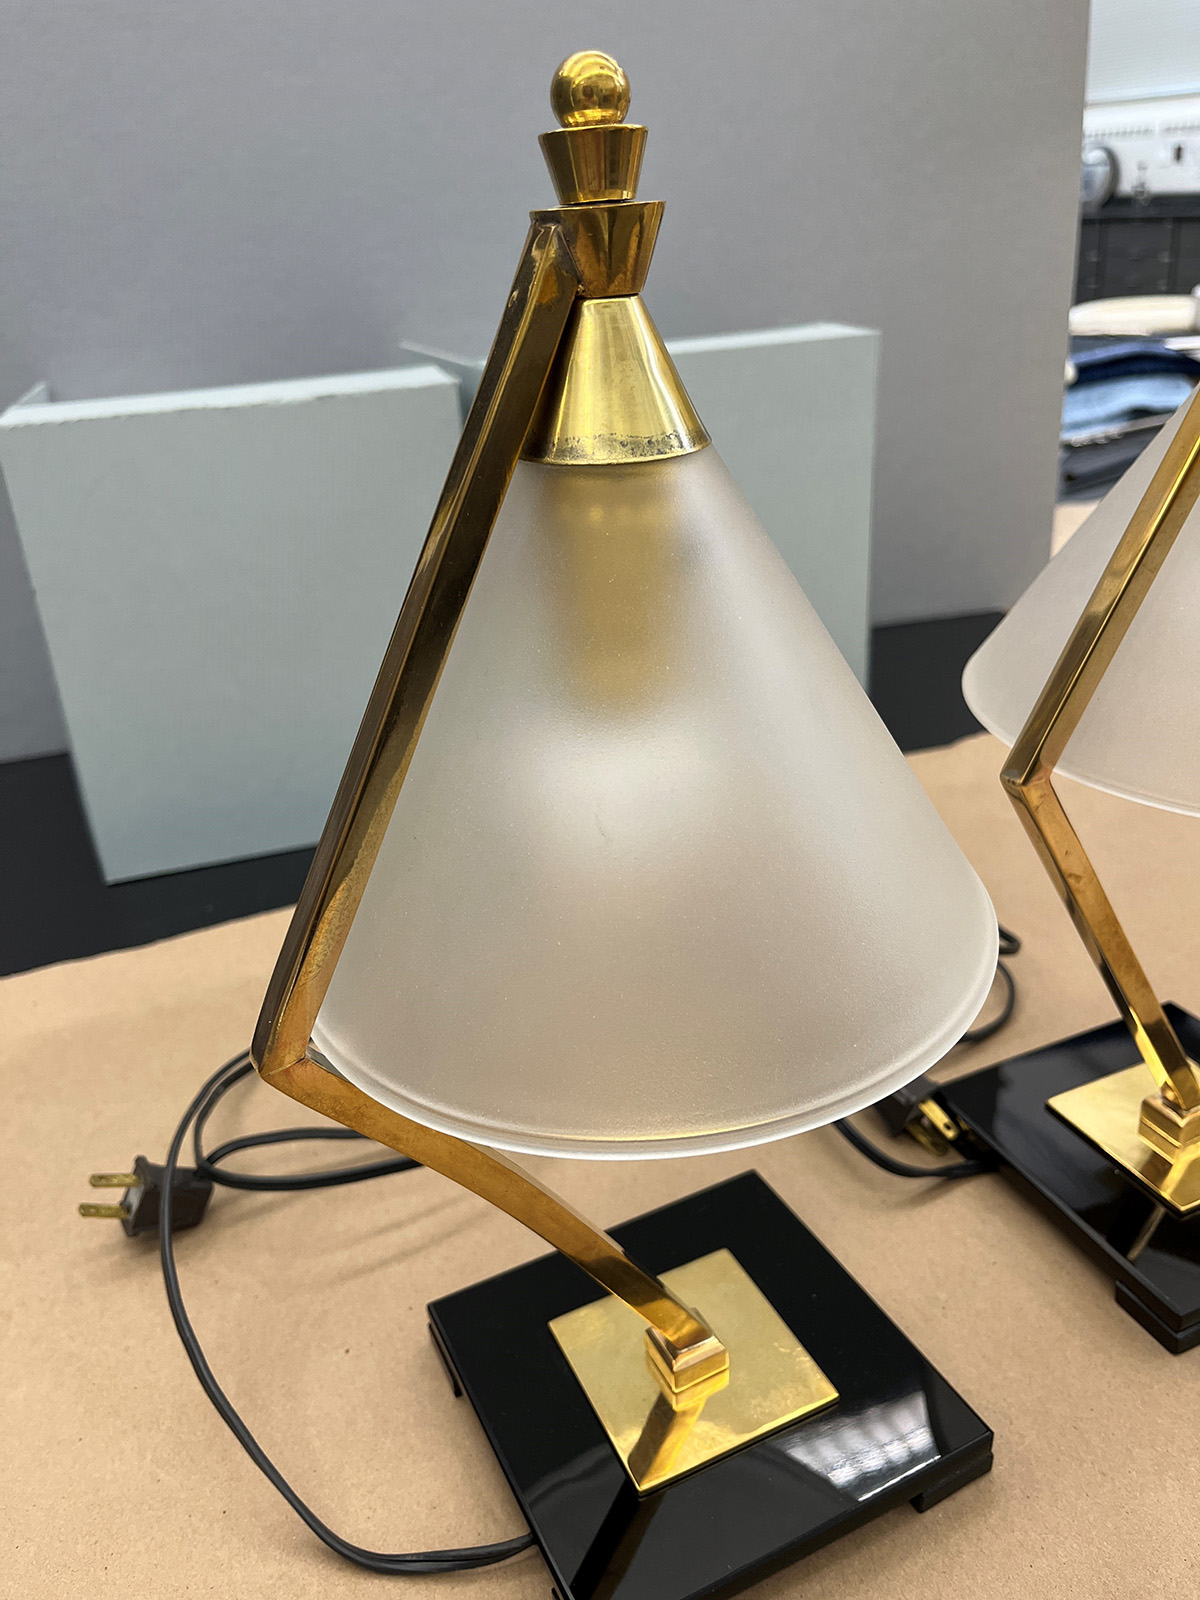 A closer look at one of the lamps, showing dark smudging at the bottom of the gold metal